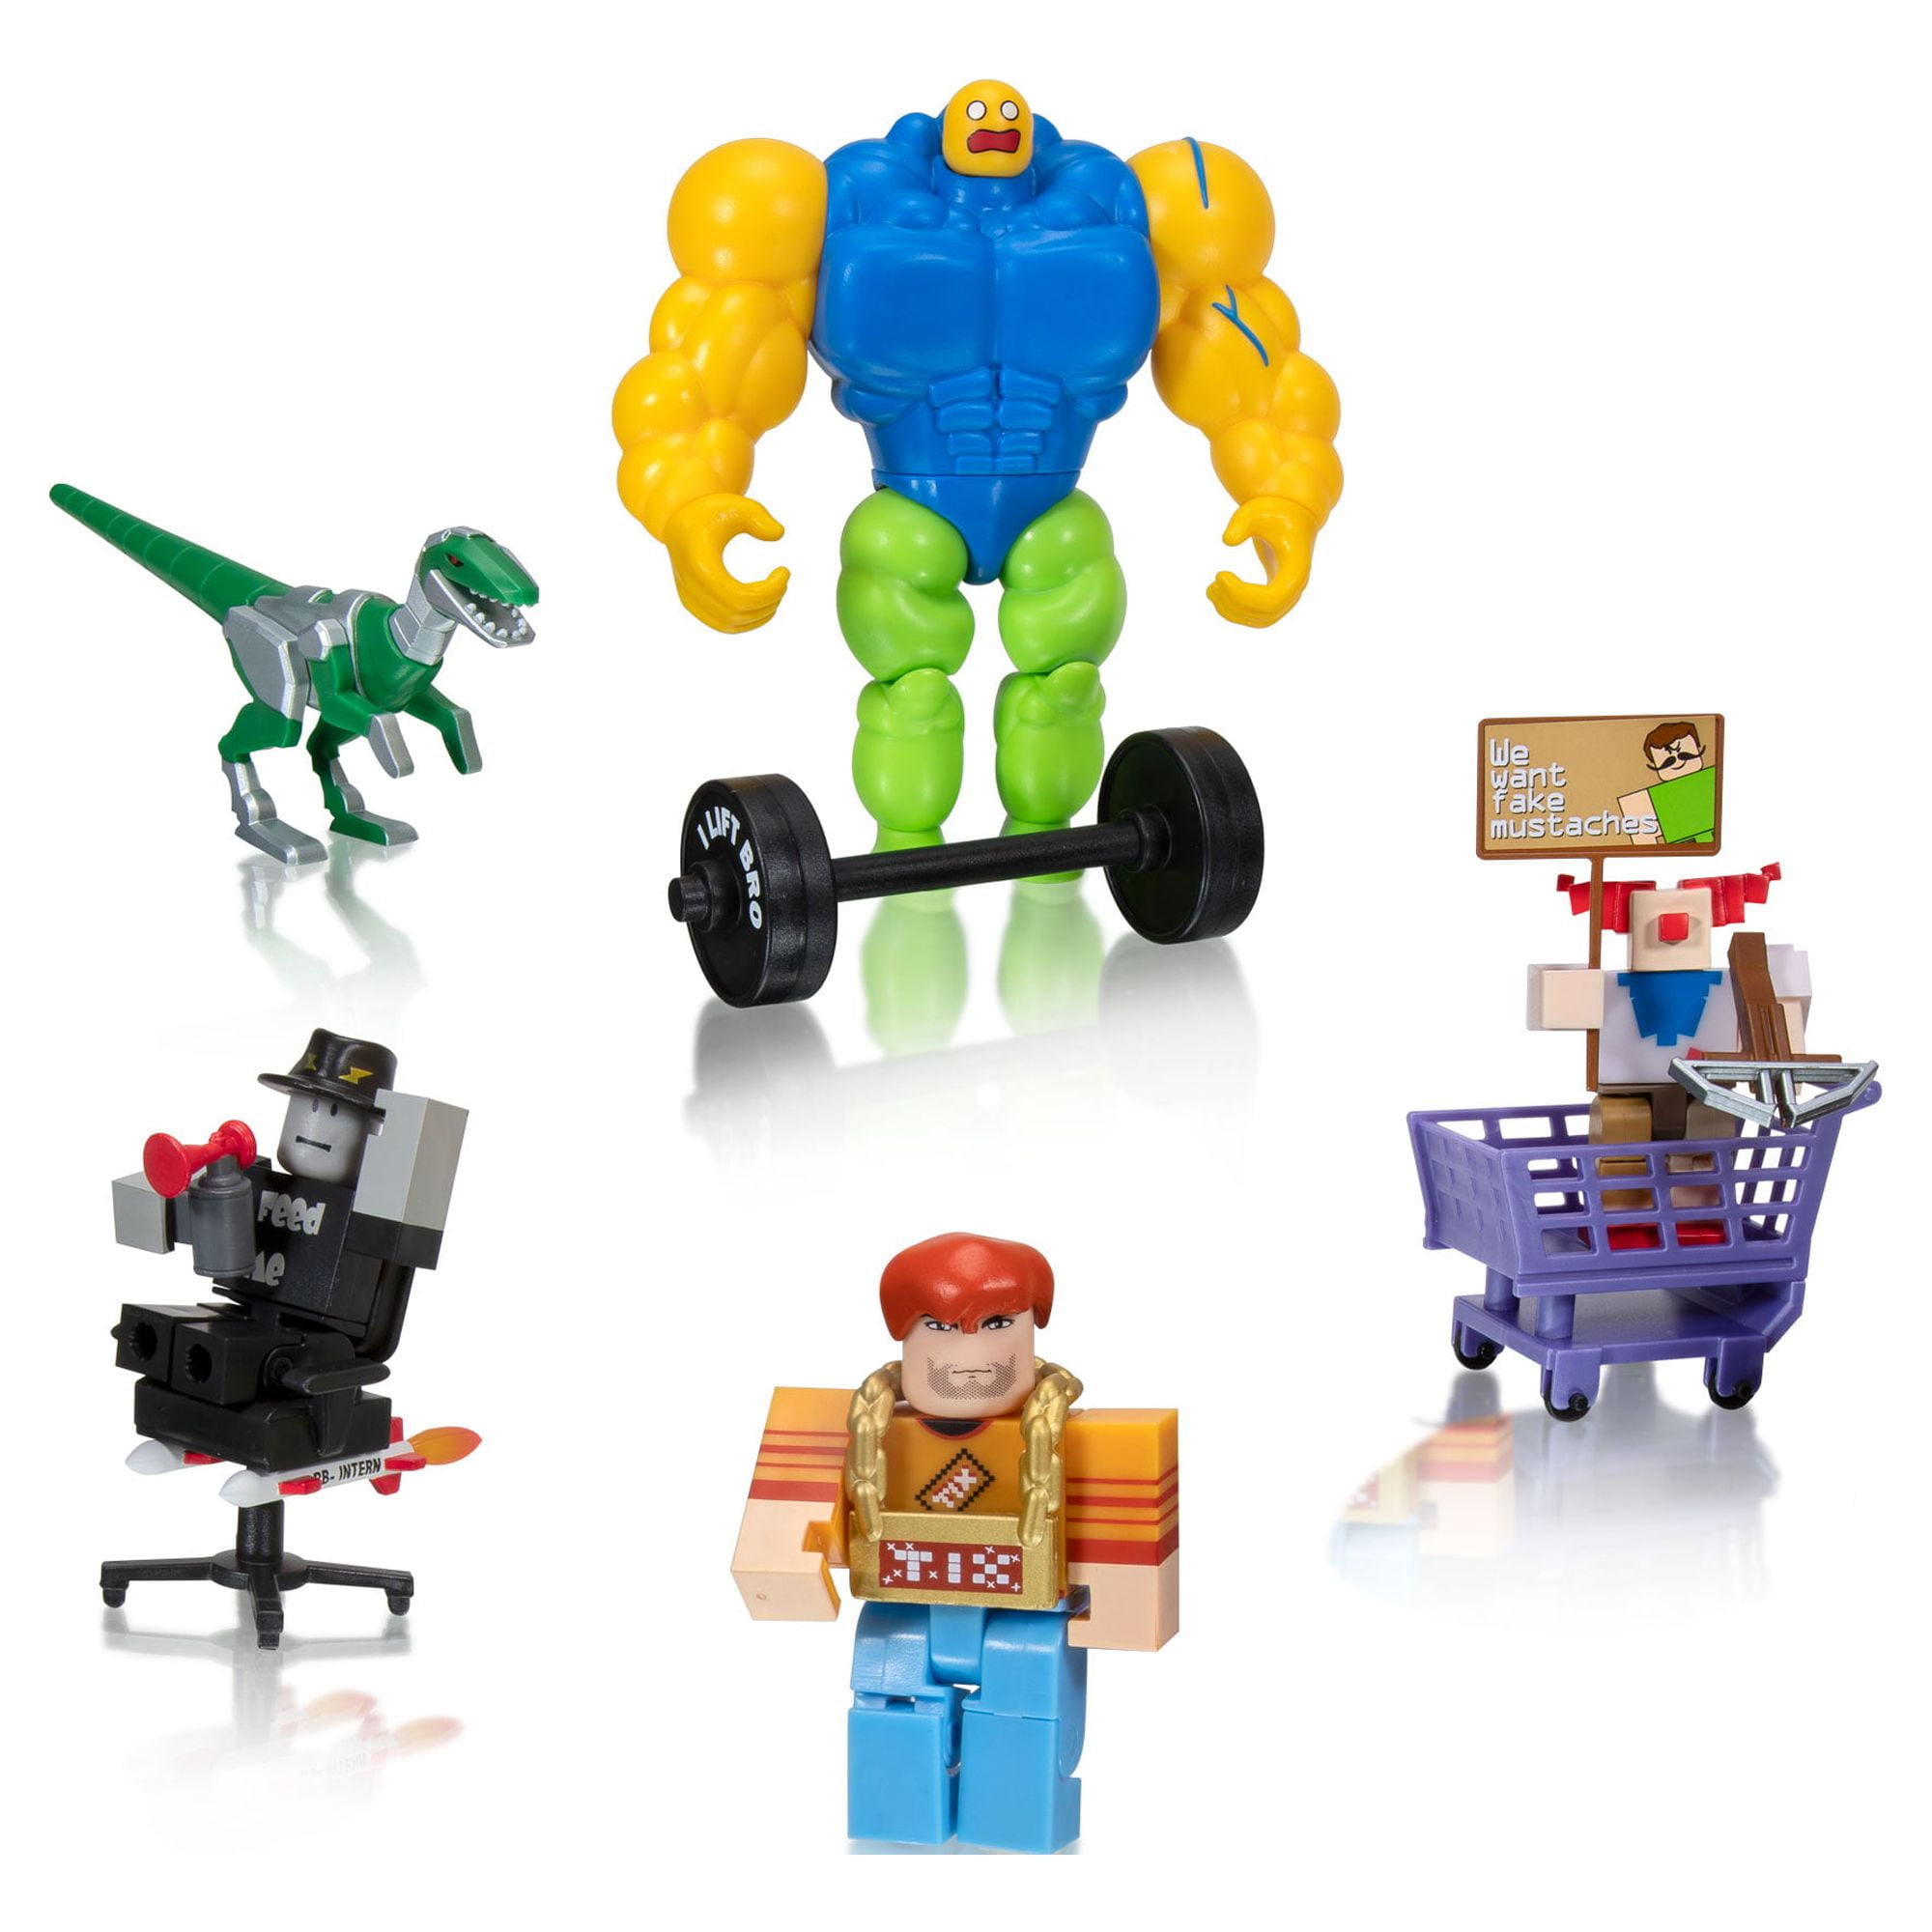 Roblox Action Collection - Meme Pack Playset Includes Exclusive Virtual  Item for 6 years and up includes figures and accessories